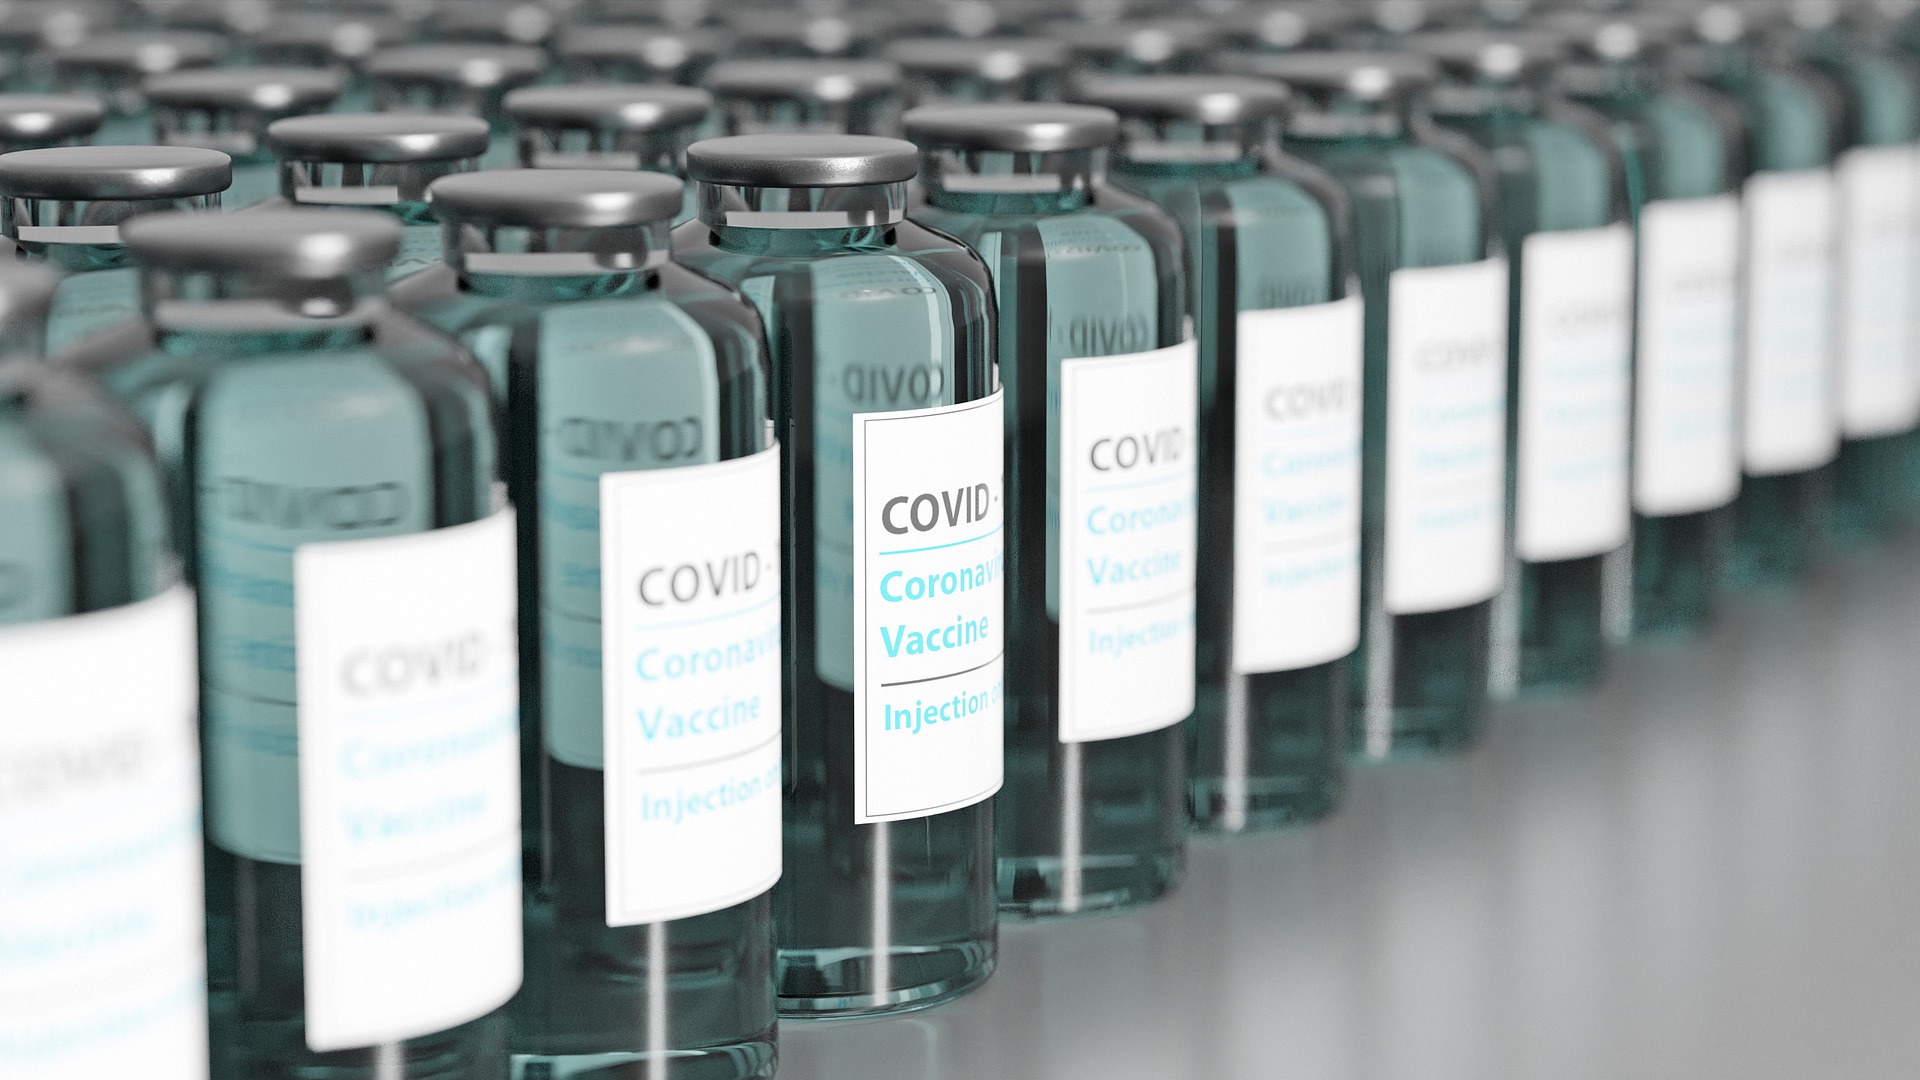 Korea to receive 40 million COVID vaccines from Moderna